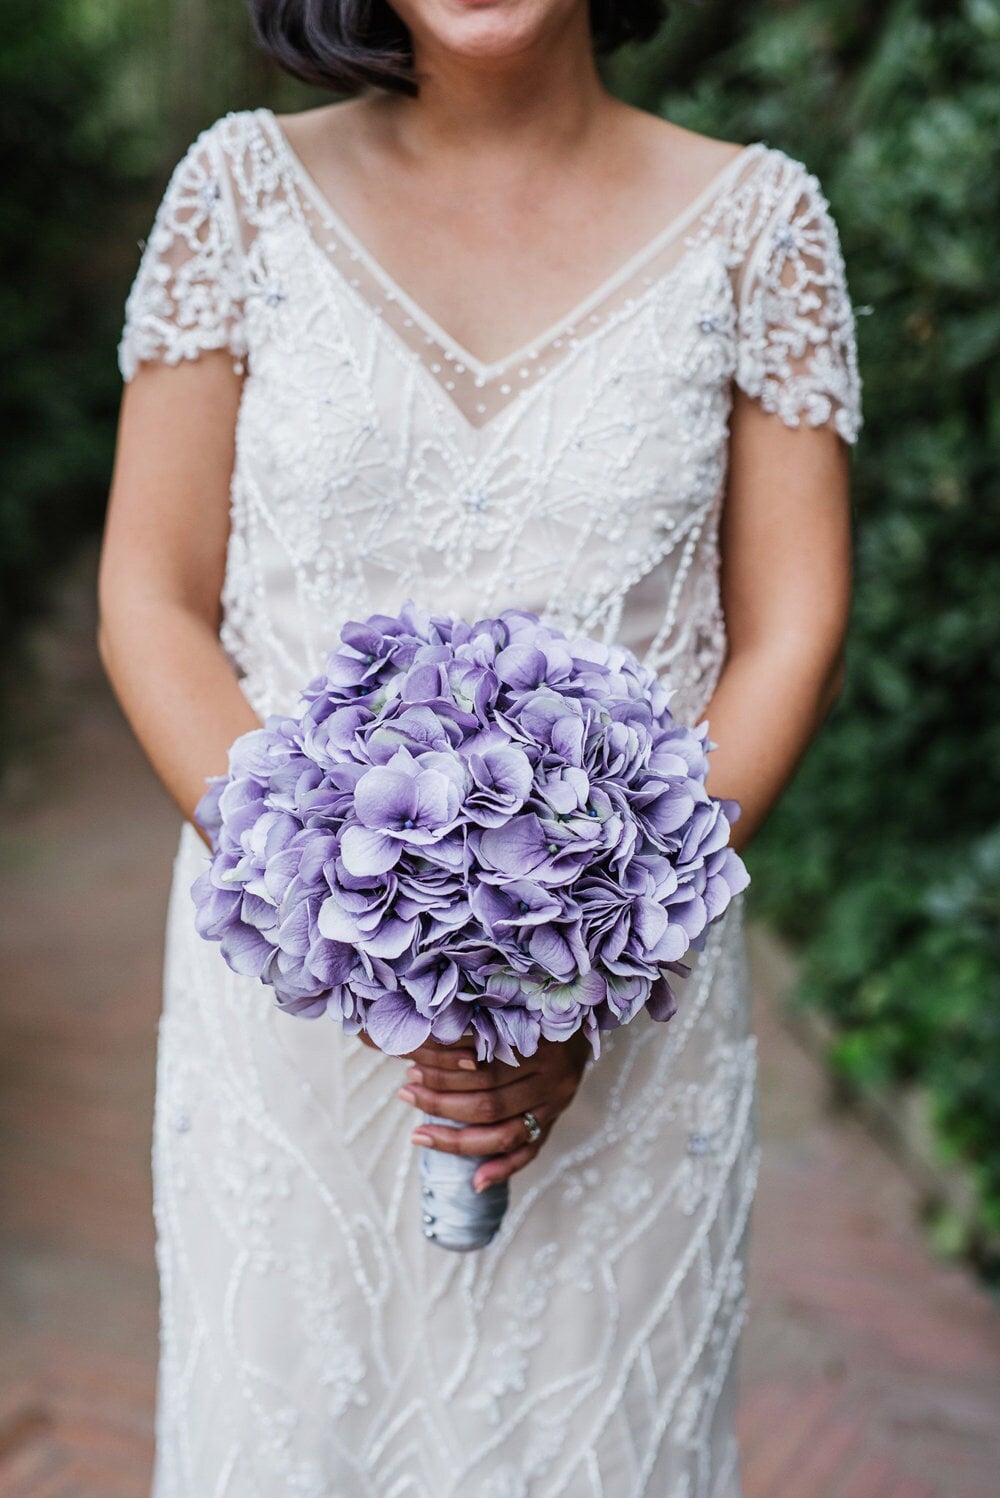 Bridal Bouquet Lavender Silk Hydrangea - Add a Groom's Boutonniere Corsage Flower Crown Cake Flowers and More!  Prom Bouquet Wedding Flowers